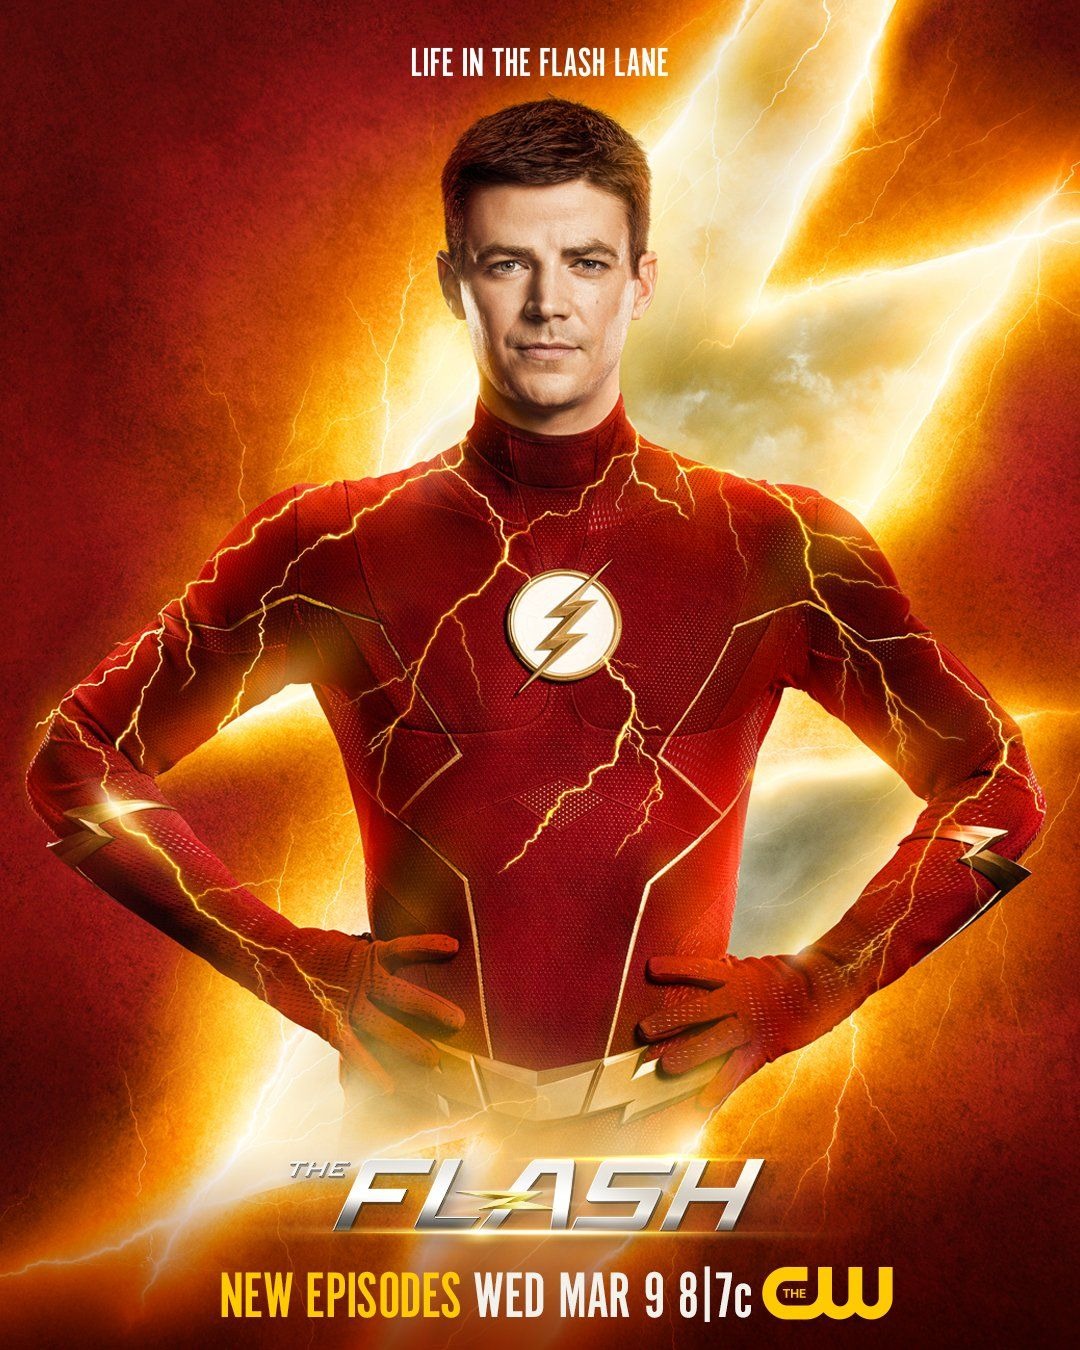 Extra Large TV Poster Image for The Flash (#50 of 65)